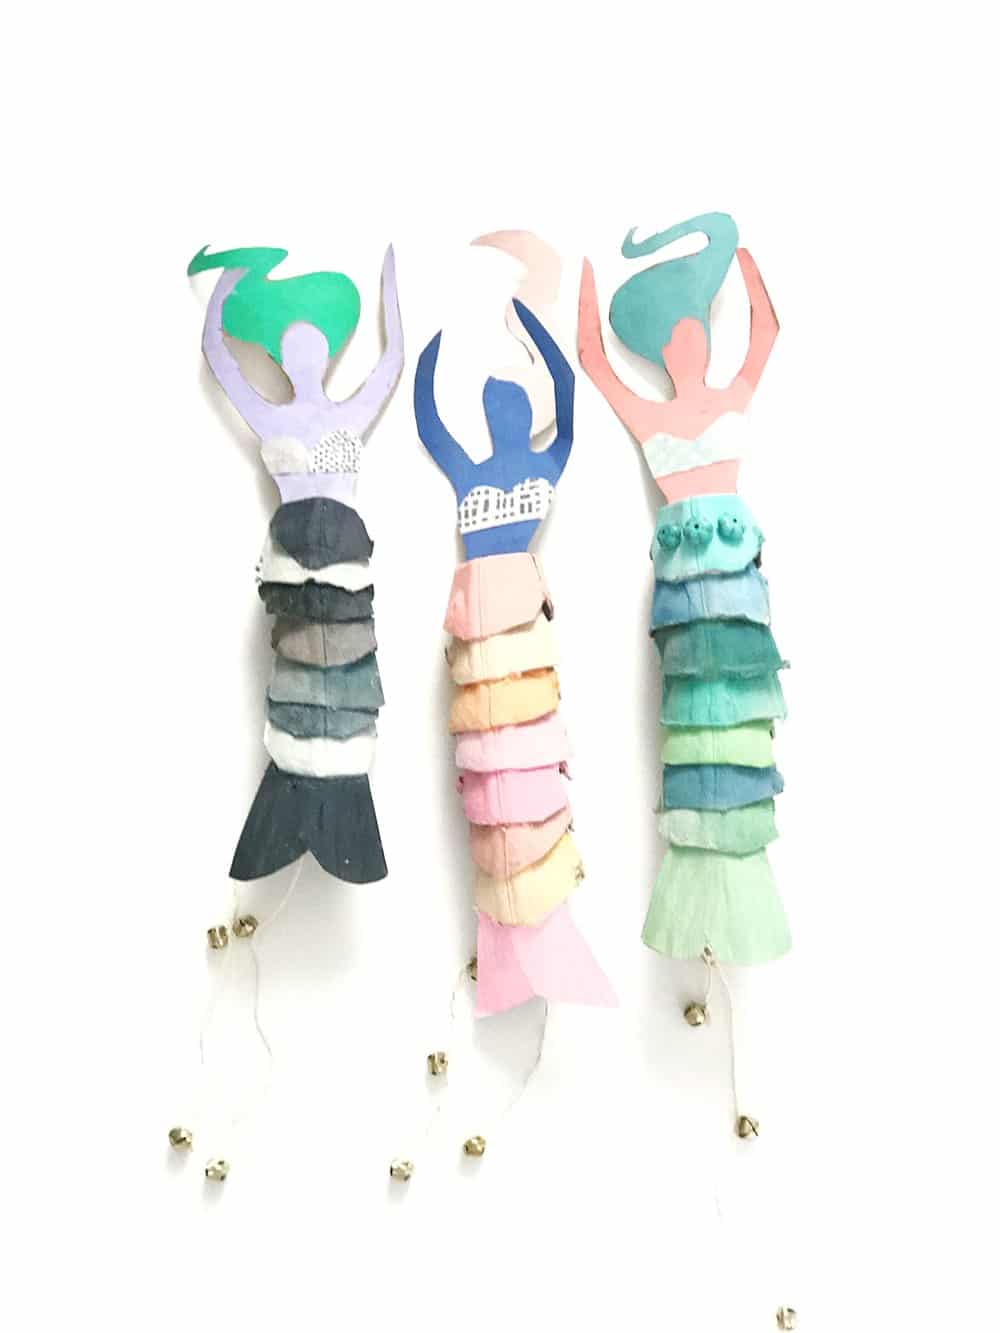 Mermaids With Stacked Egg Carton Tails